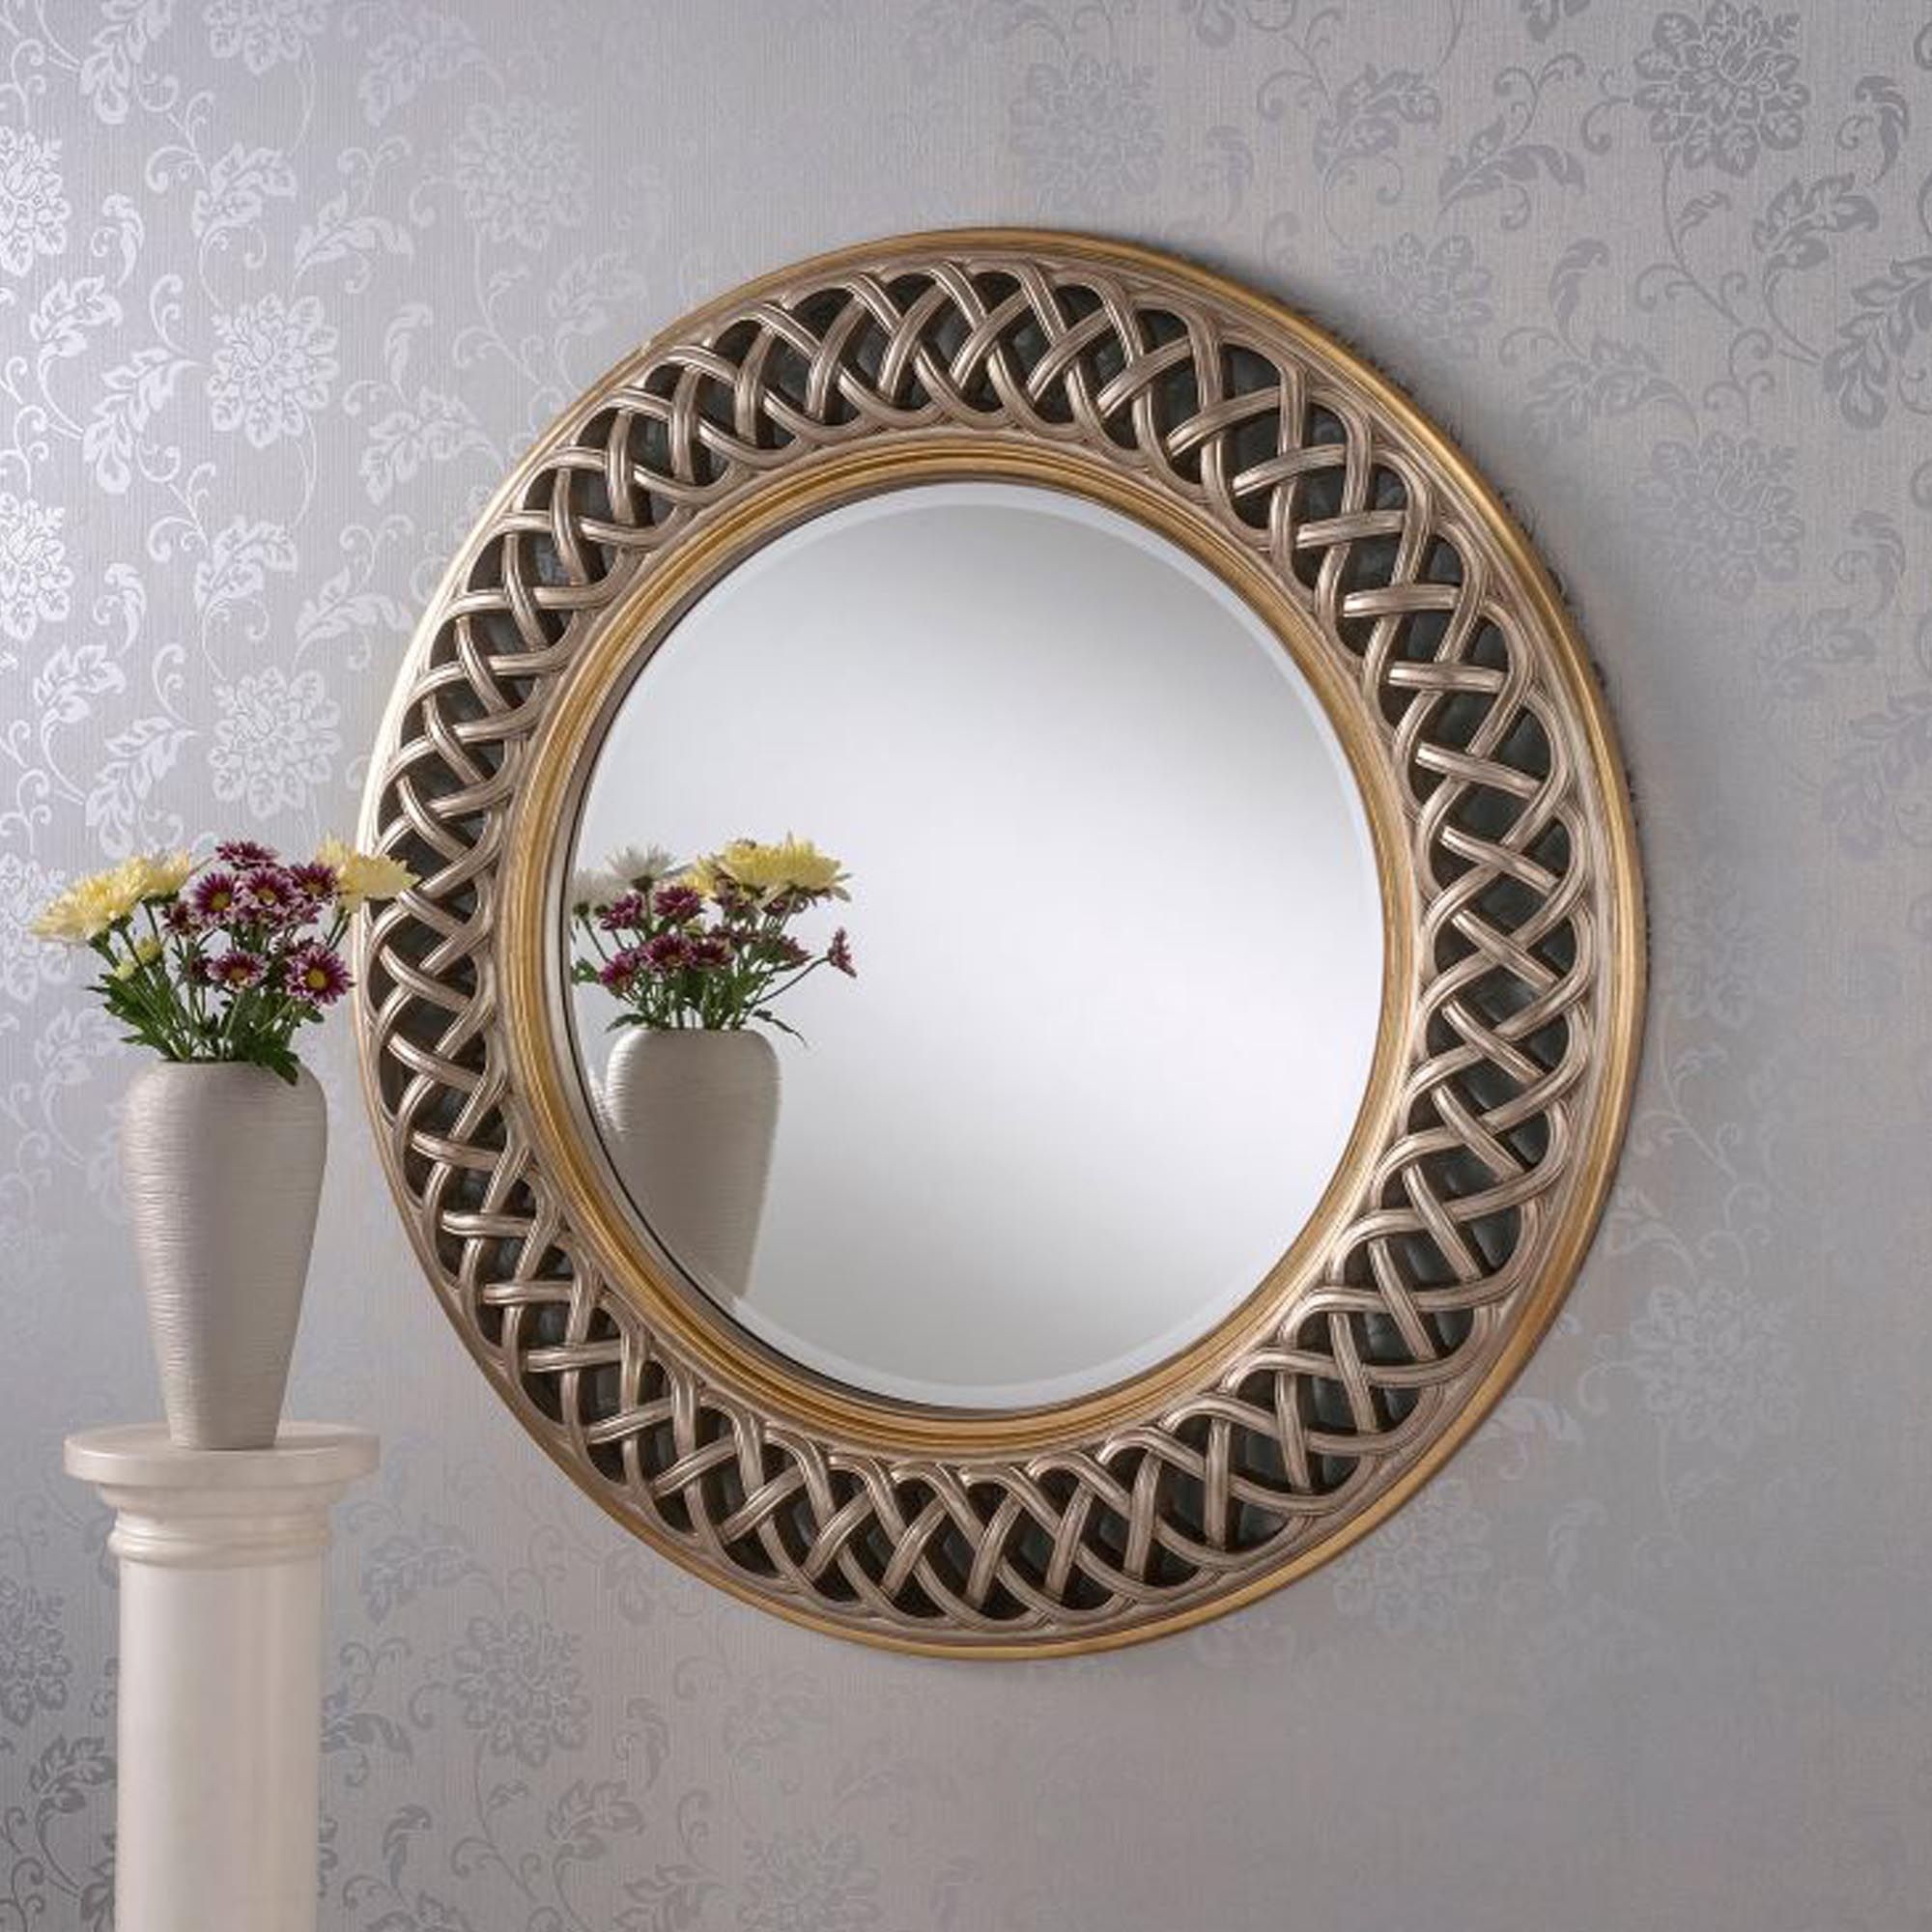 Interlocking Lace Silver/gold Decorative Wall Mirror | Homesdirect365 Pertaining To Silver Asymmetrical Wall Mirrors (View 15 of 15)